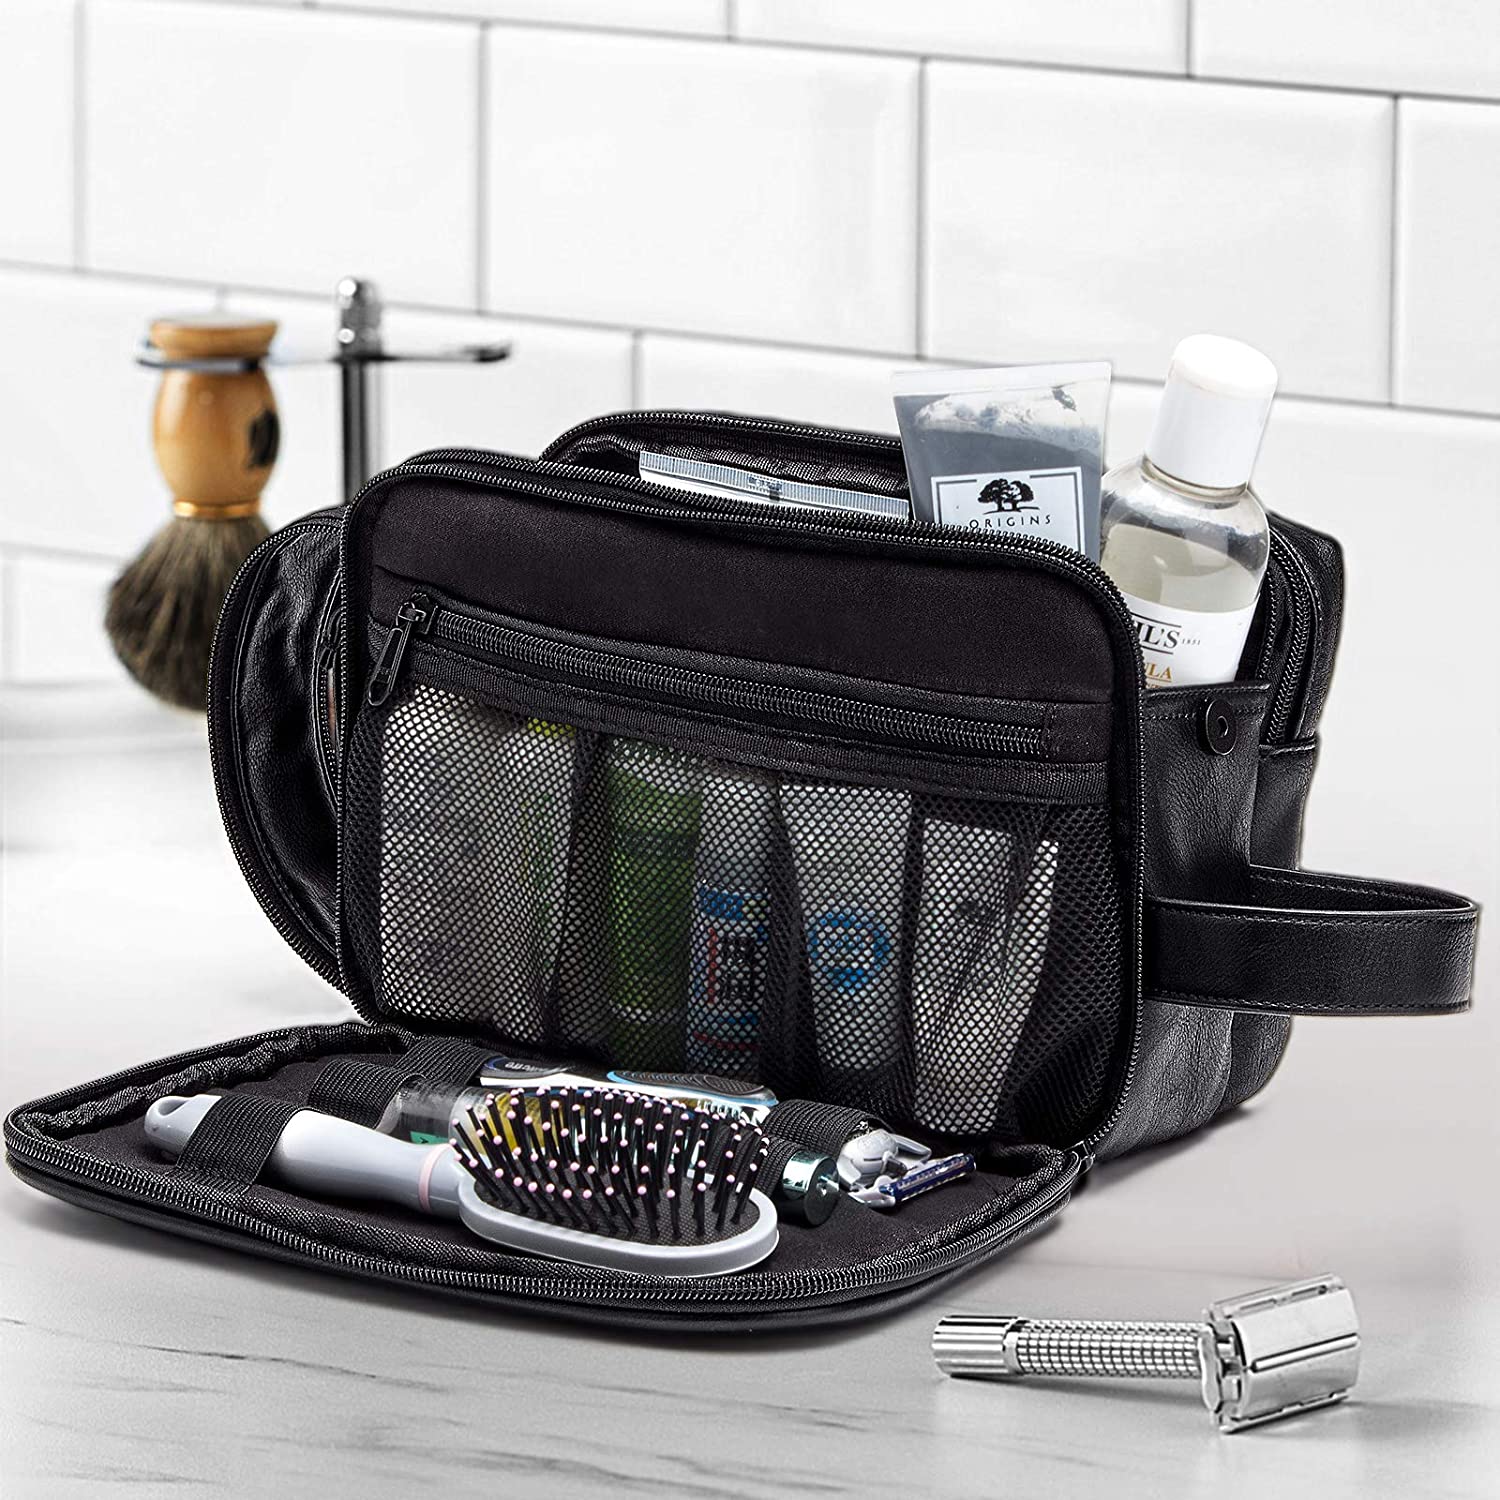 Small Toiletry Travel Bag